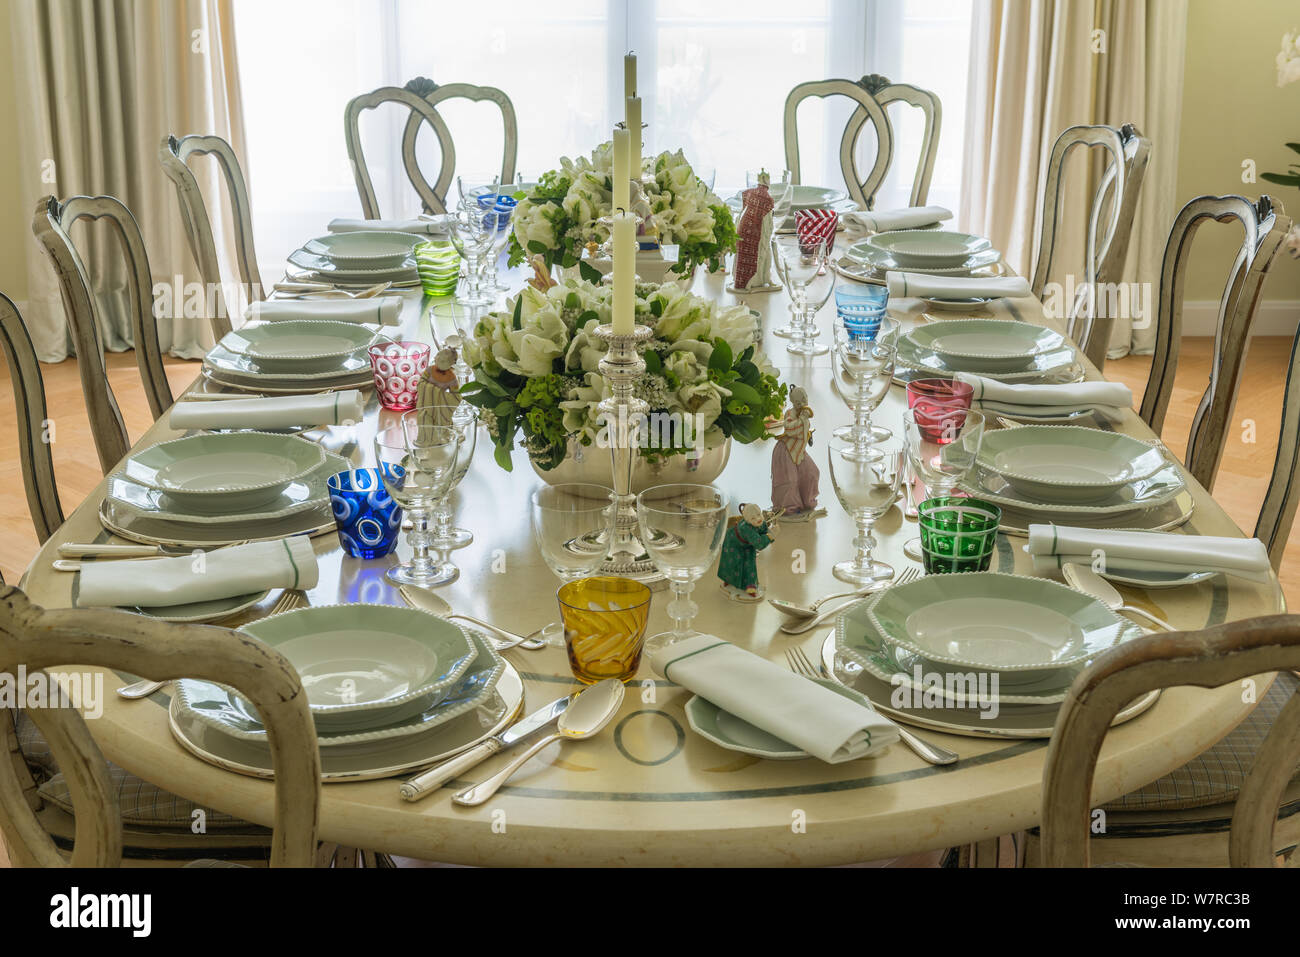 Set dining table Stock Photo